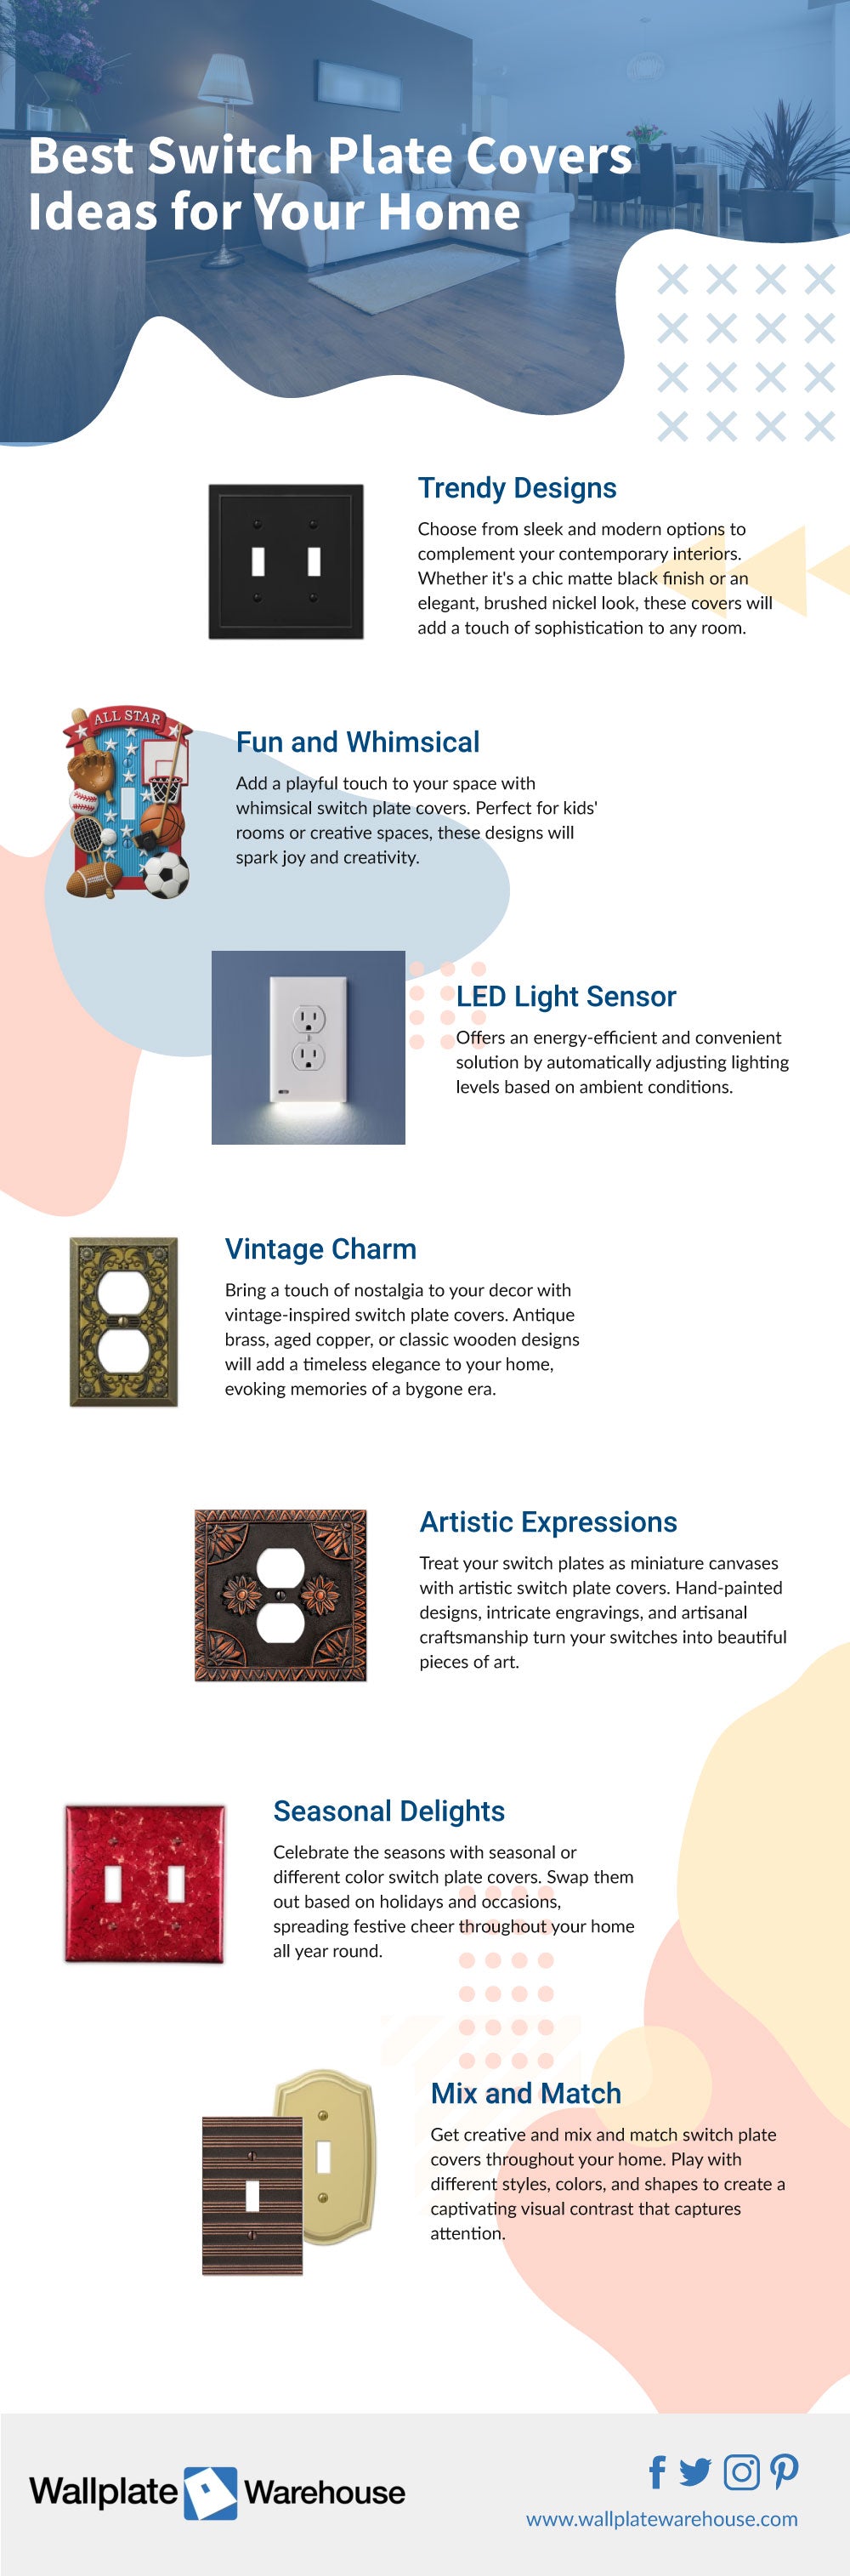 Best Switch Plate Covers Ideas for Your Home  Infographic